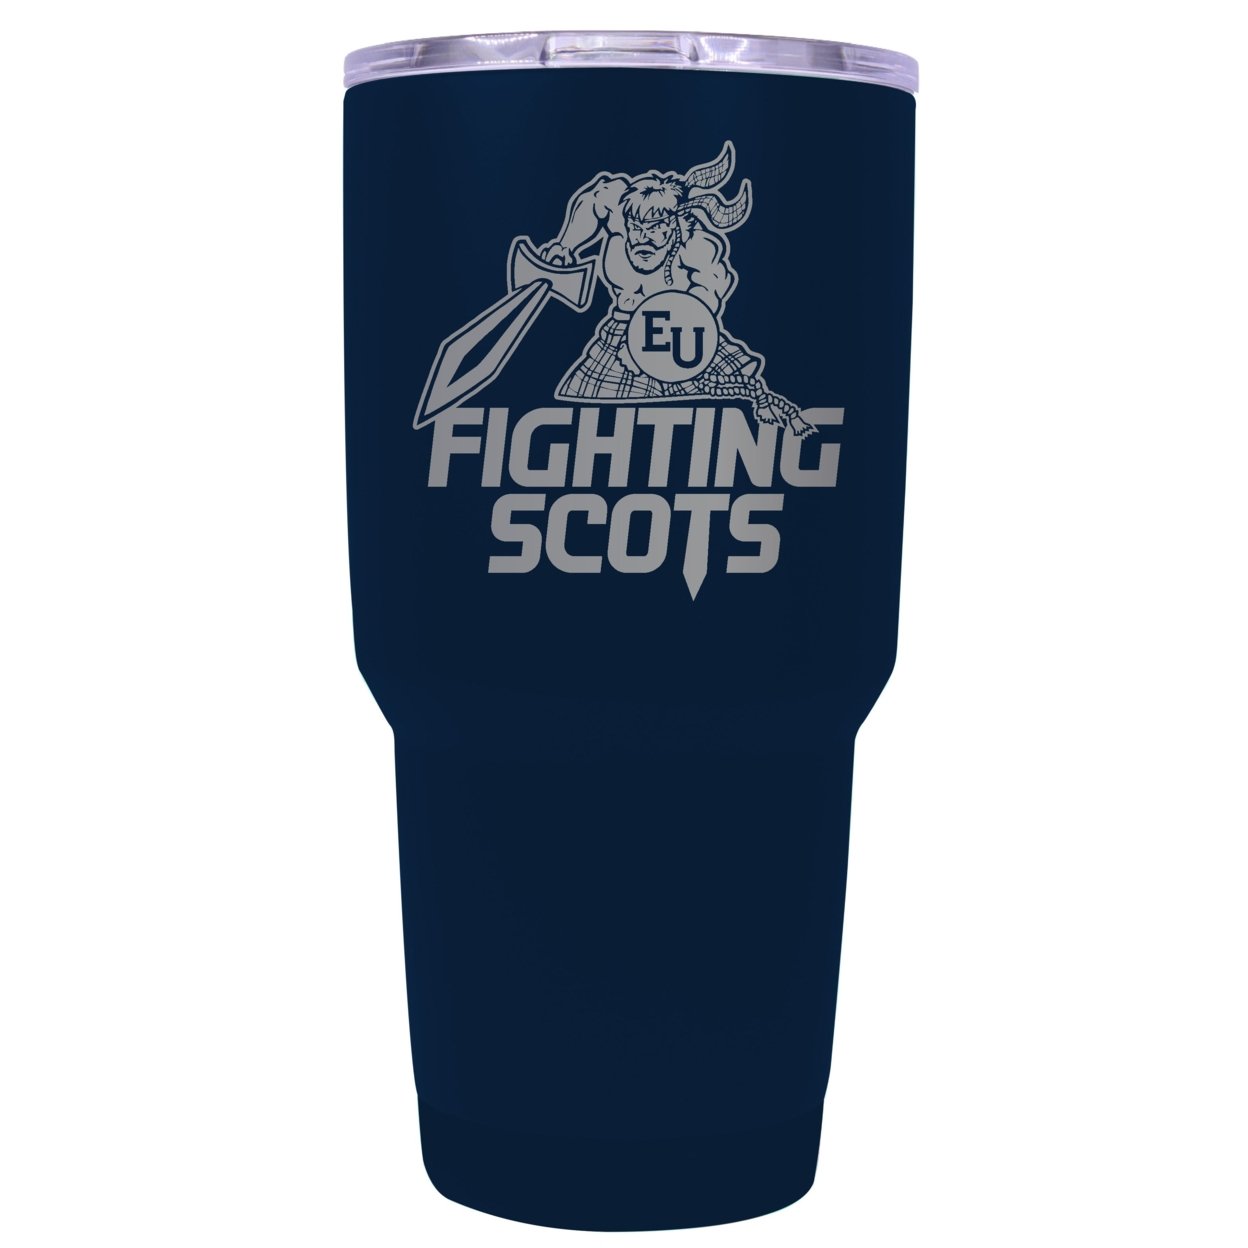 Edinboro University 24 Oz Laser Engraved Stainless Steel Insulated Tumbler - Choose Your Color. - Navy